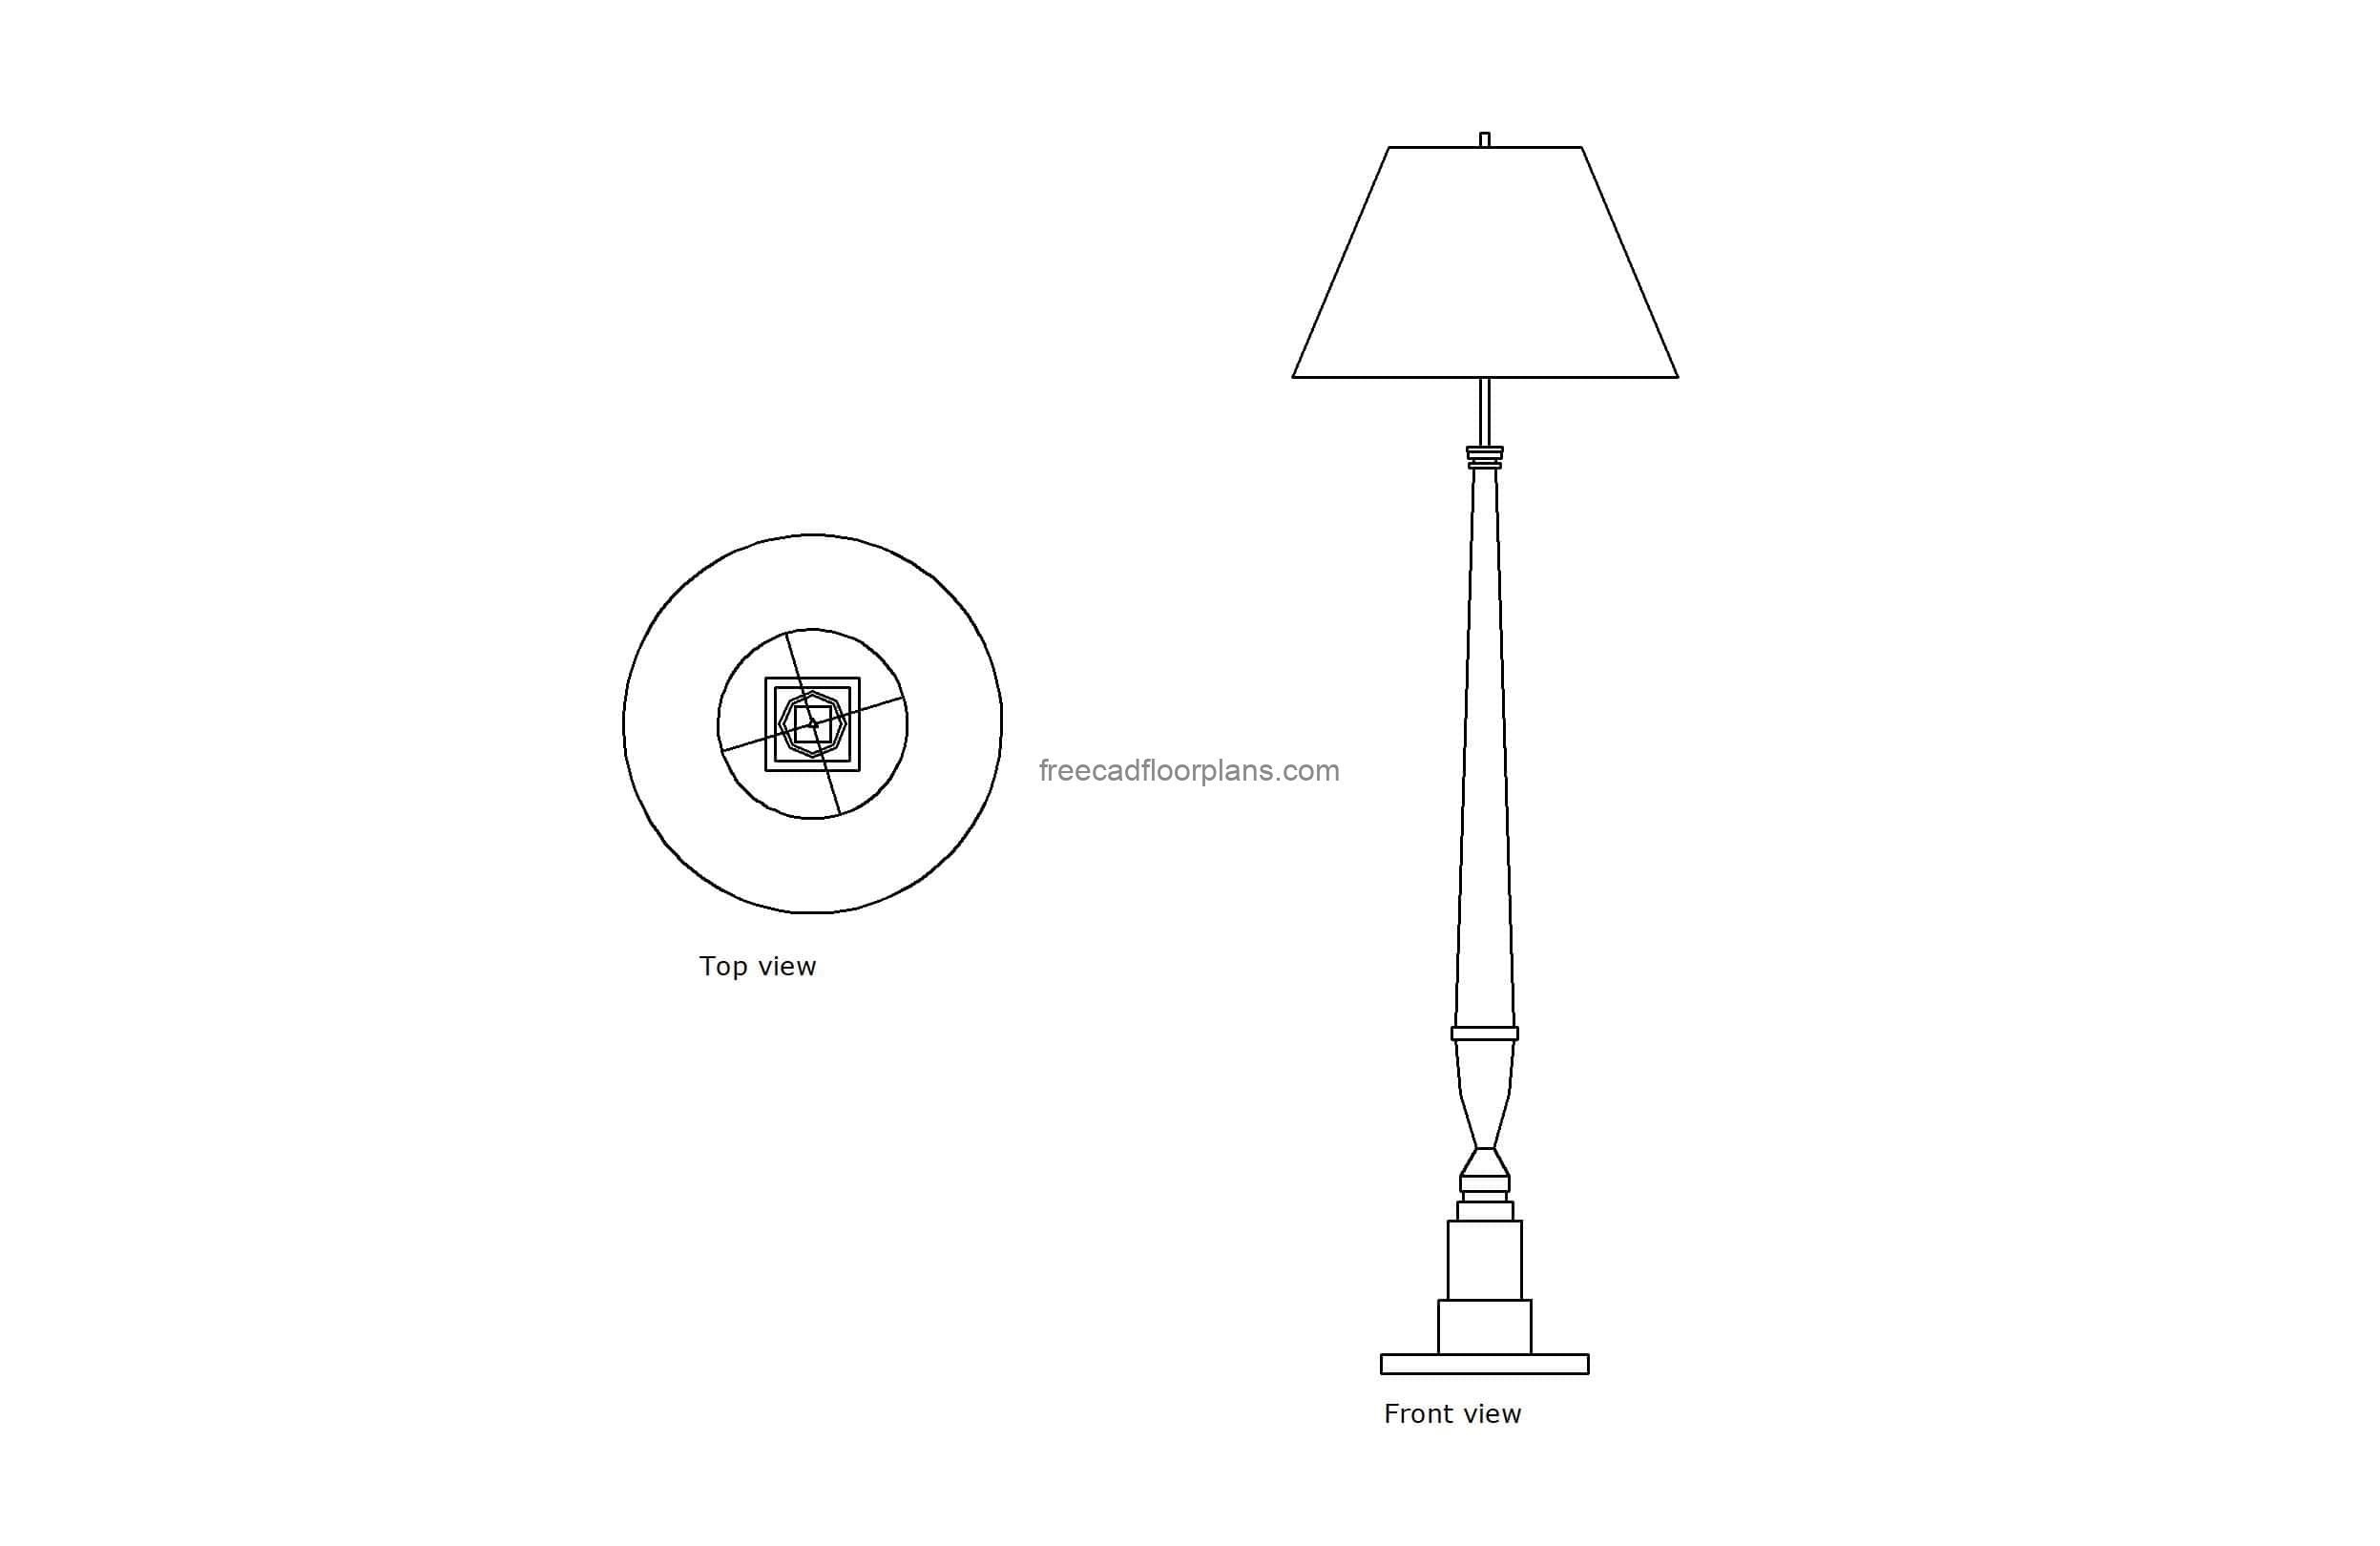 autocad drawing of a traditional floor lamp, plan and elevation 2d views, dwg file free for download